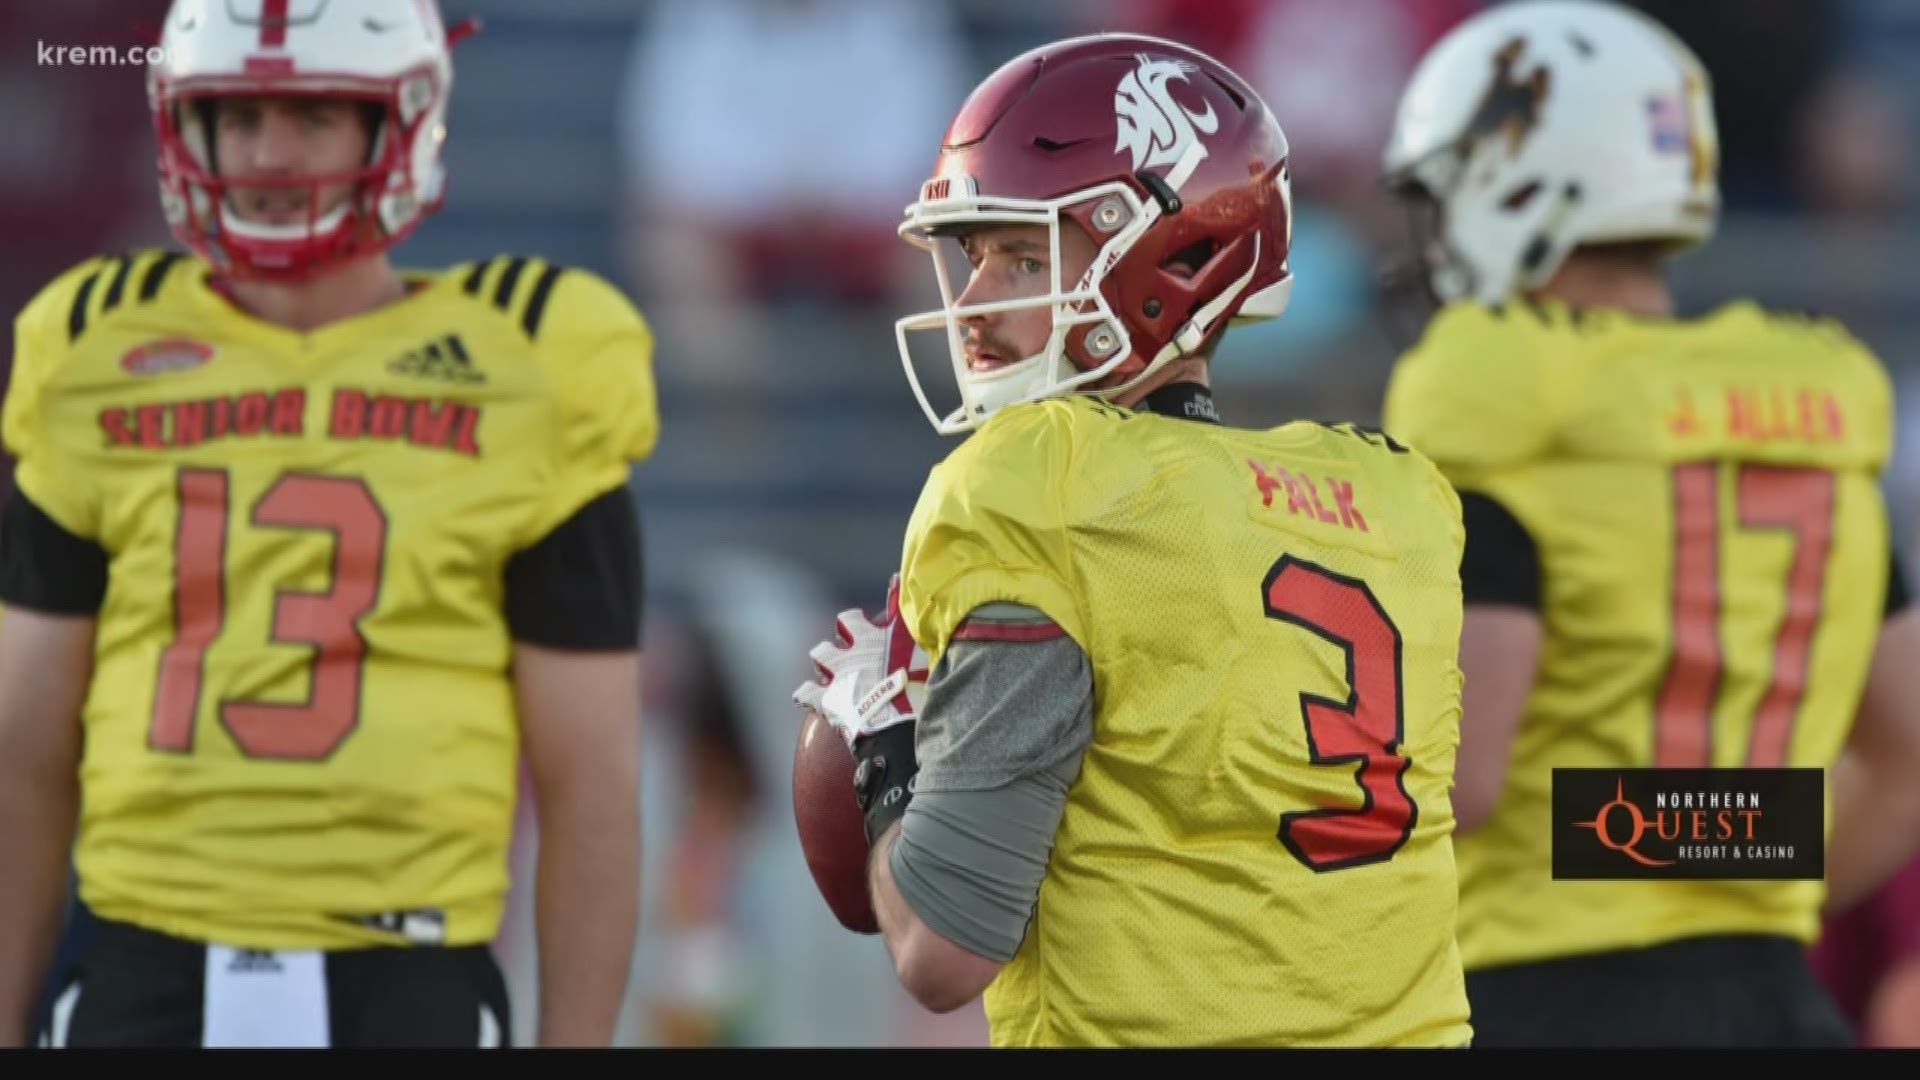 After the death of teammate Tyler Hilinski Luke Falk spoke during Senior Bowl Week about his desire to play a part in helping prevent similar tragedies.